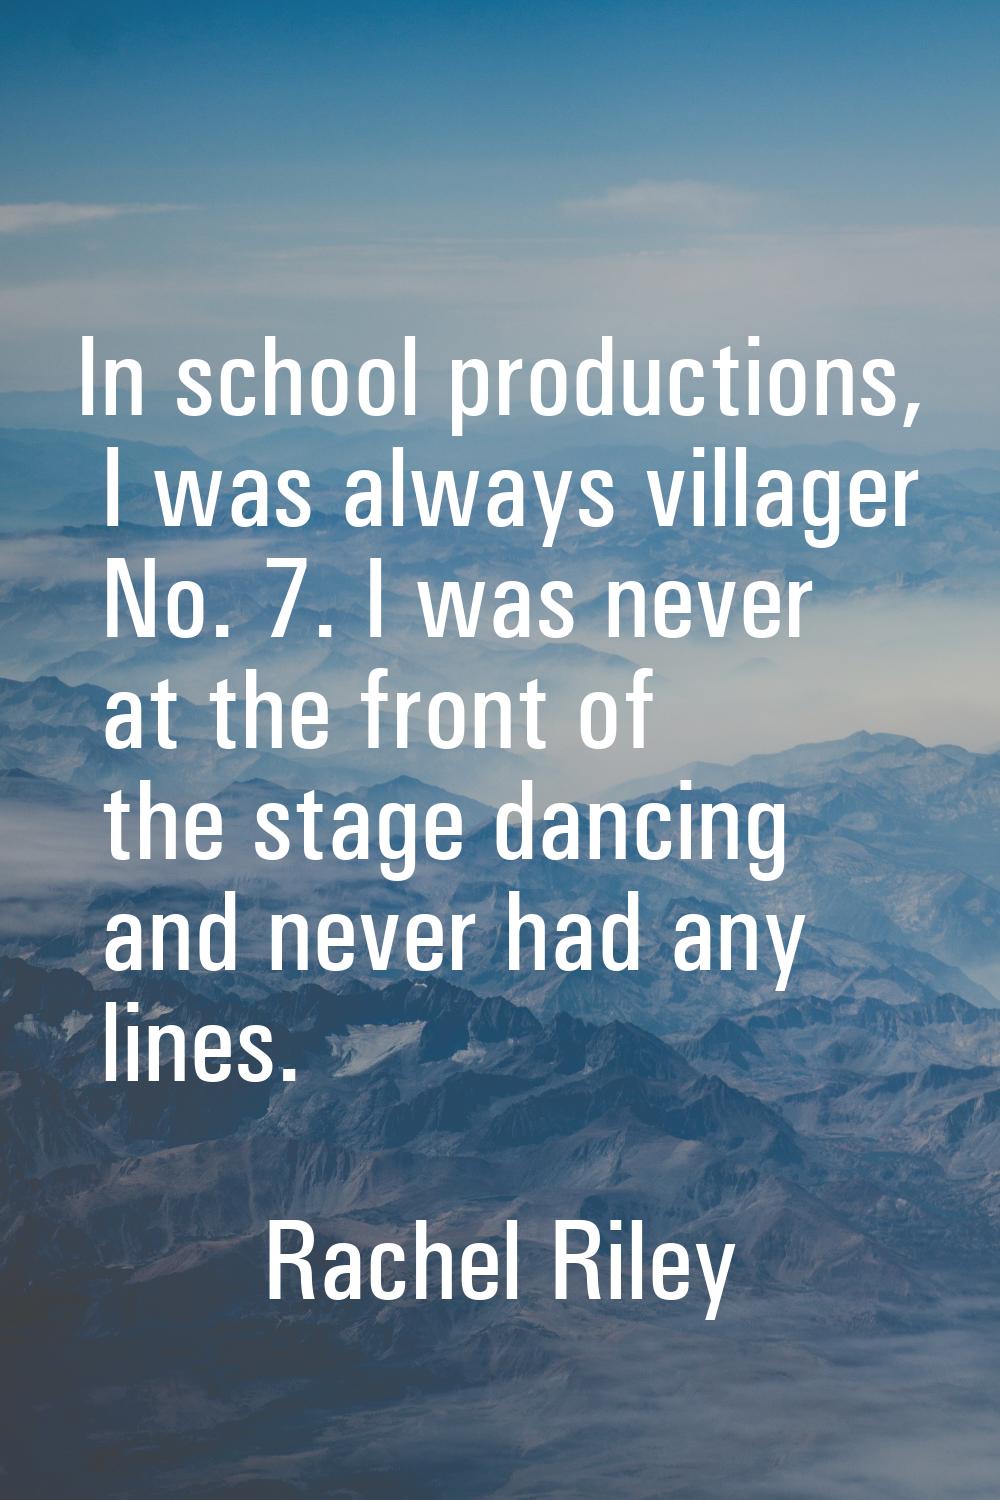 In school productions, I was always villager No. 7. I was never at the front of the stage dancing a